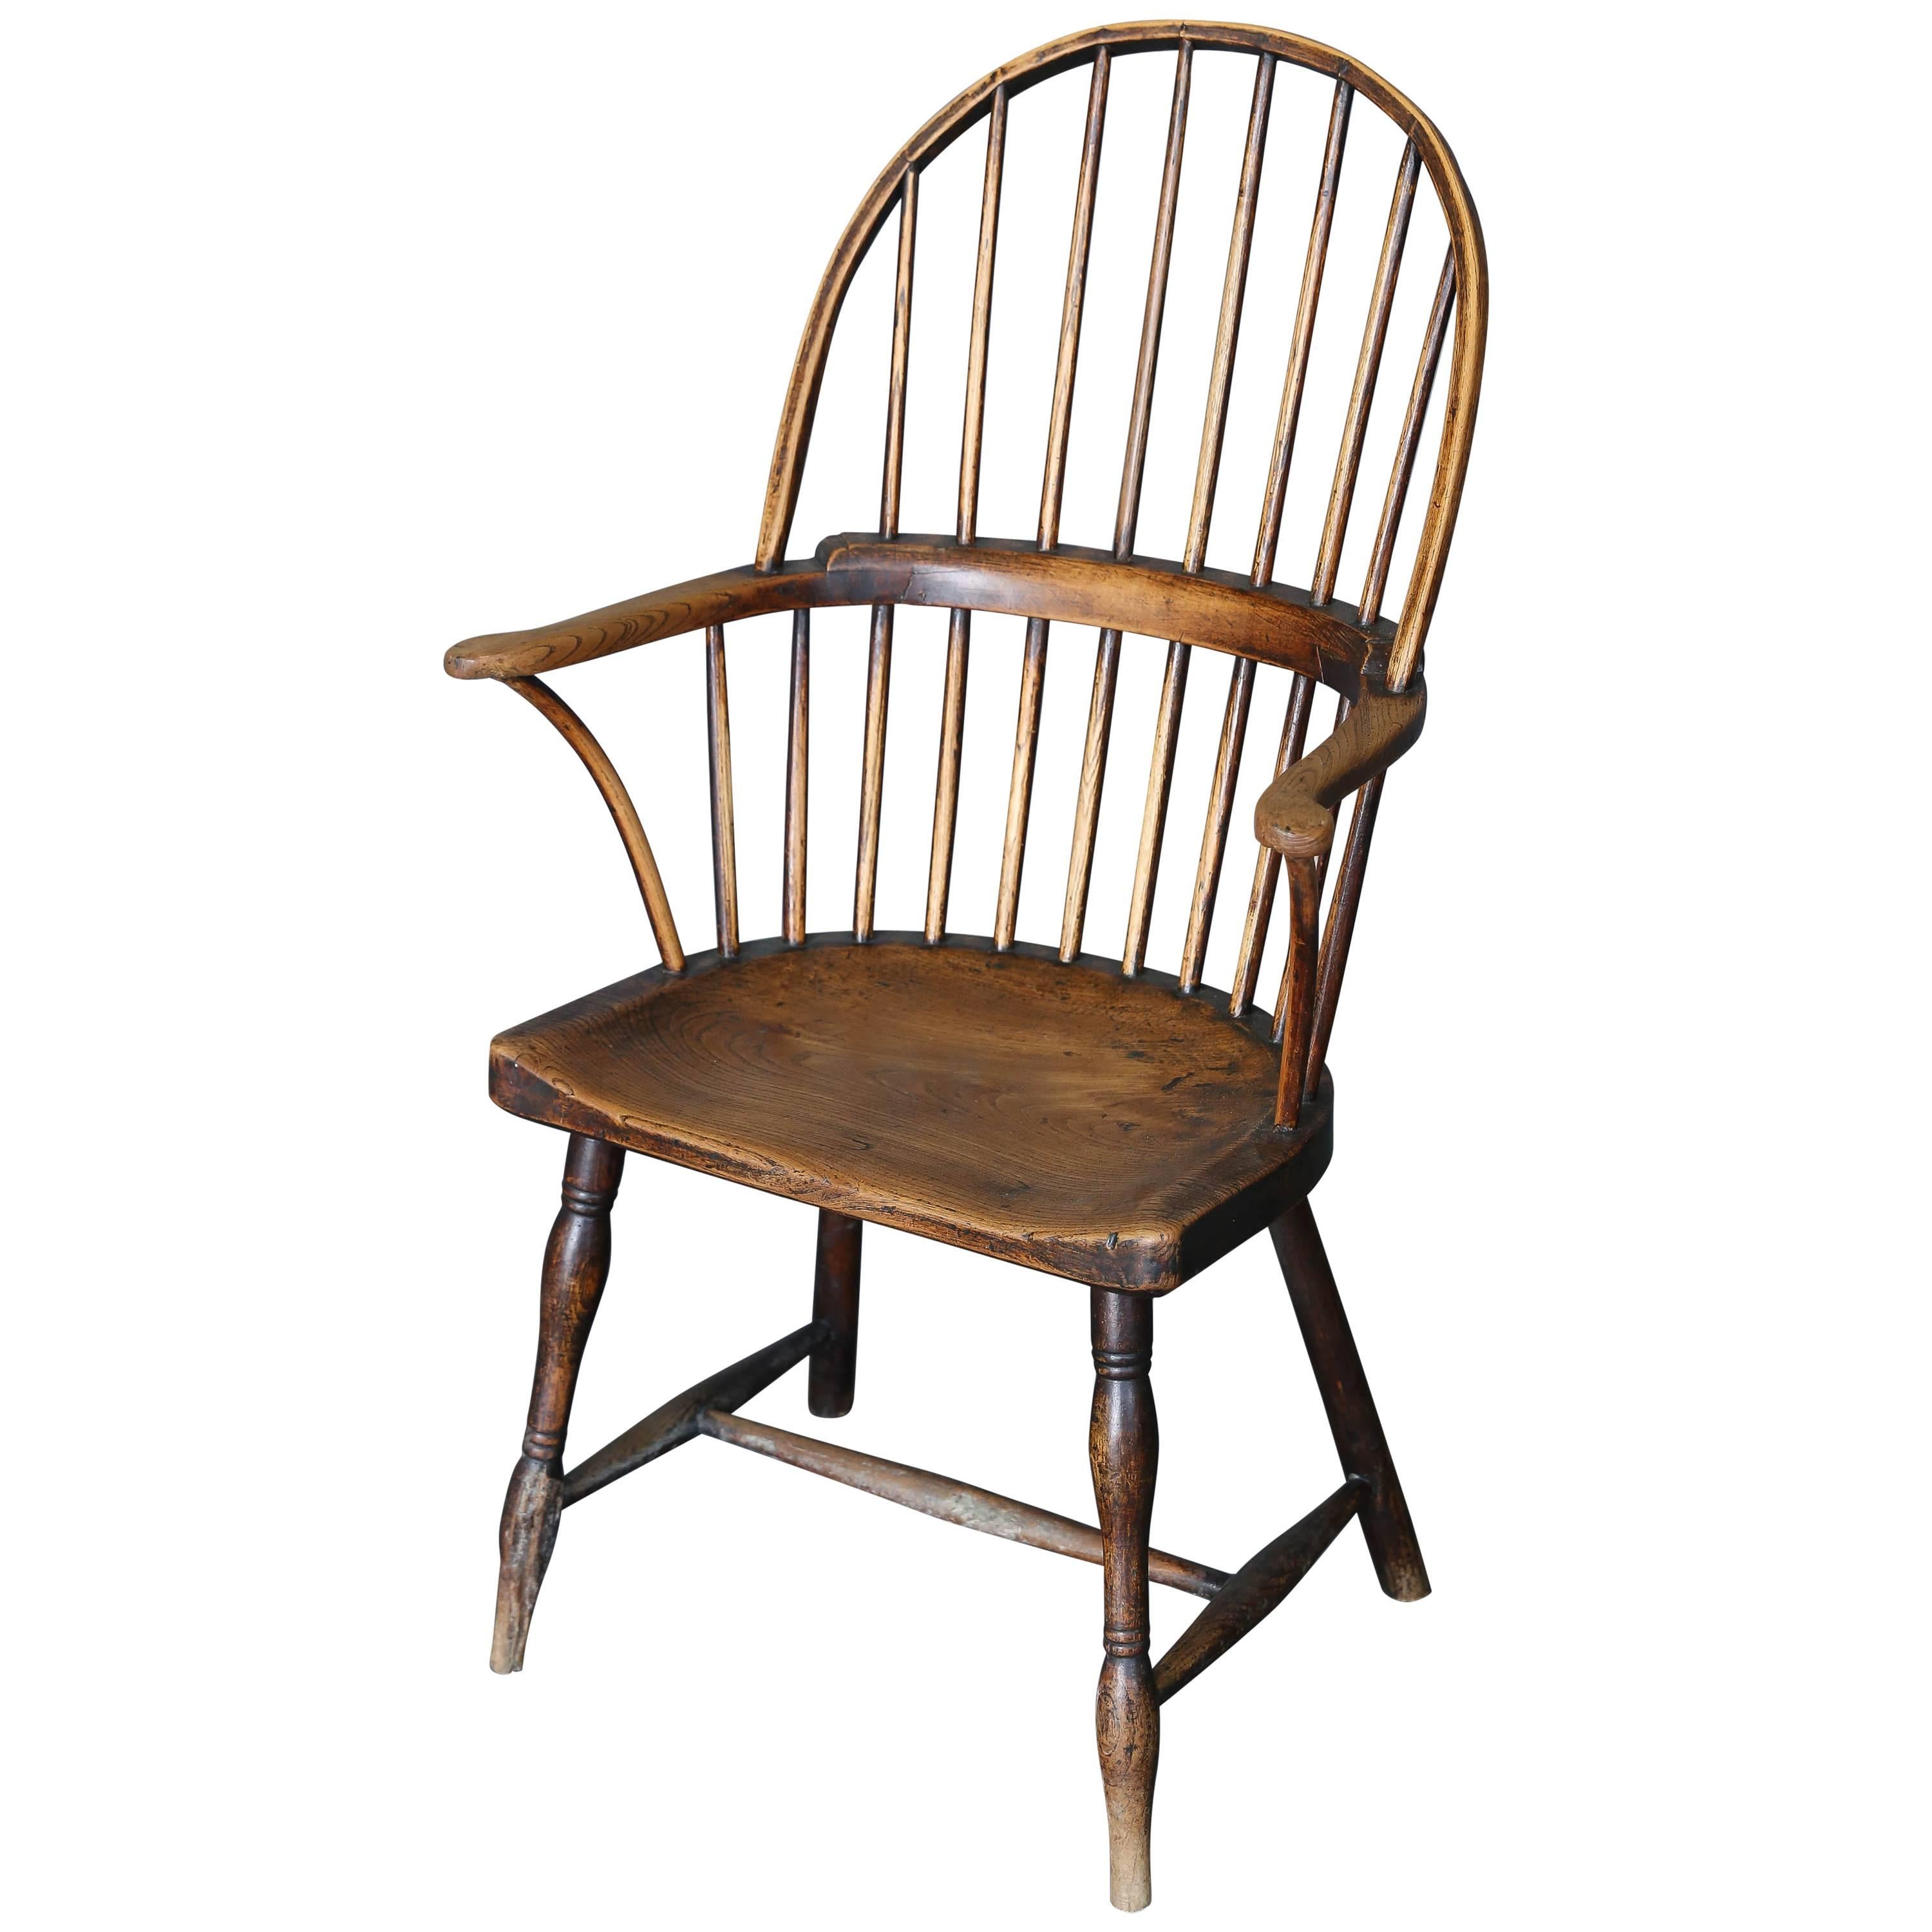 Antique 18th Century Ash and Elm Windsor Chair